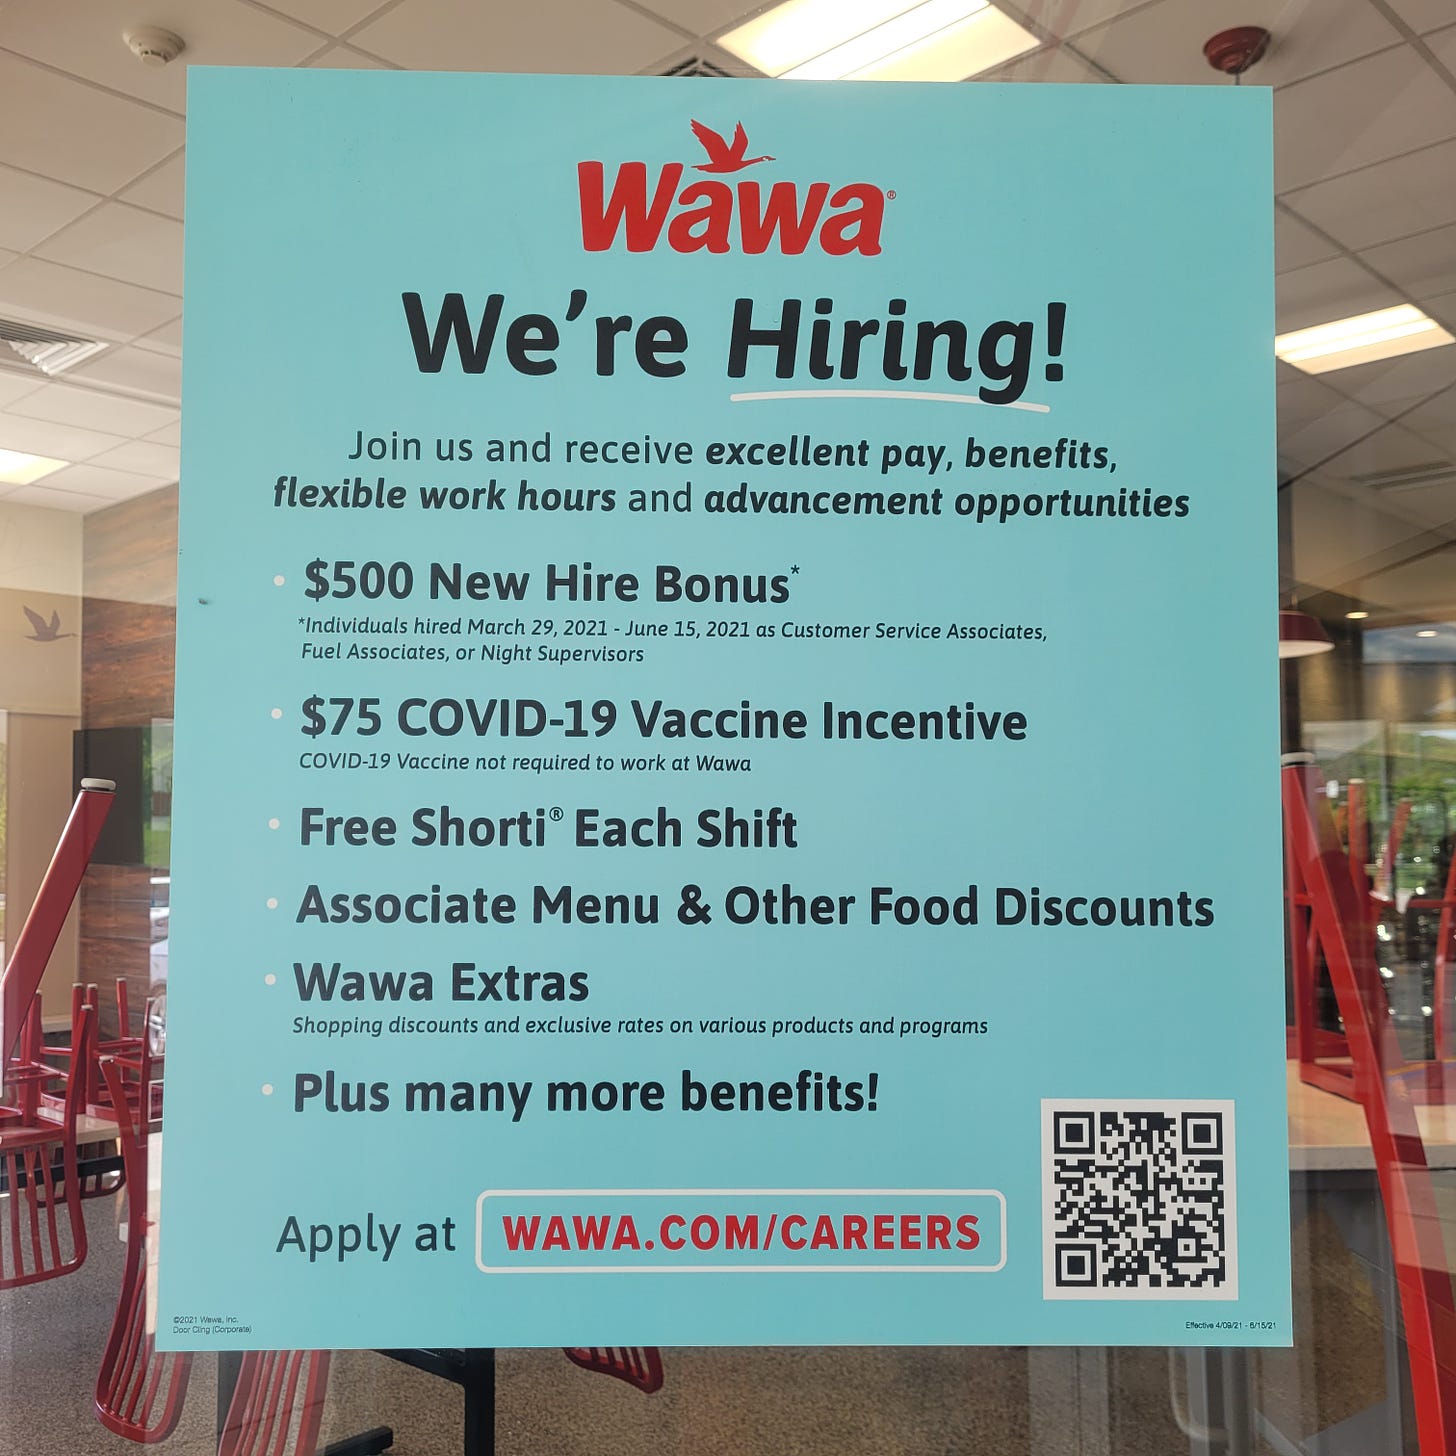 A sign at Wawa announcing the perks of working there, including a $500 hiring bonus, vaccine incentive, employee meals, discounts, and more.